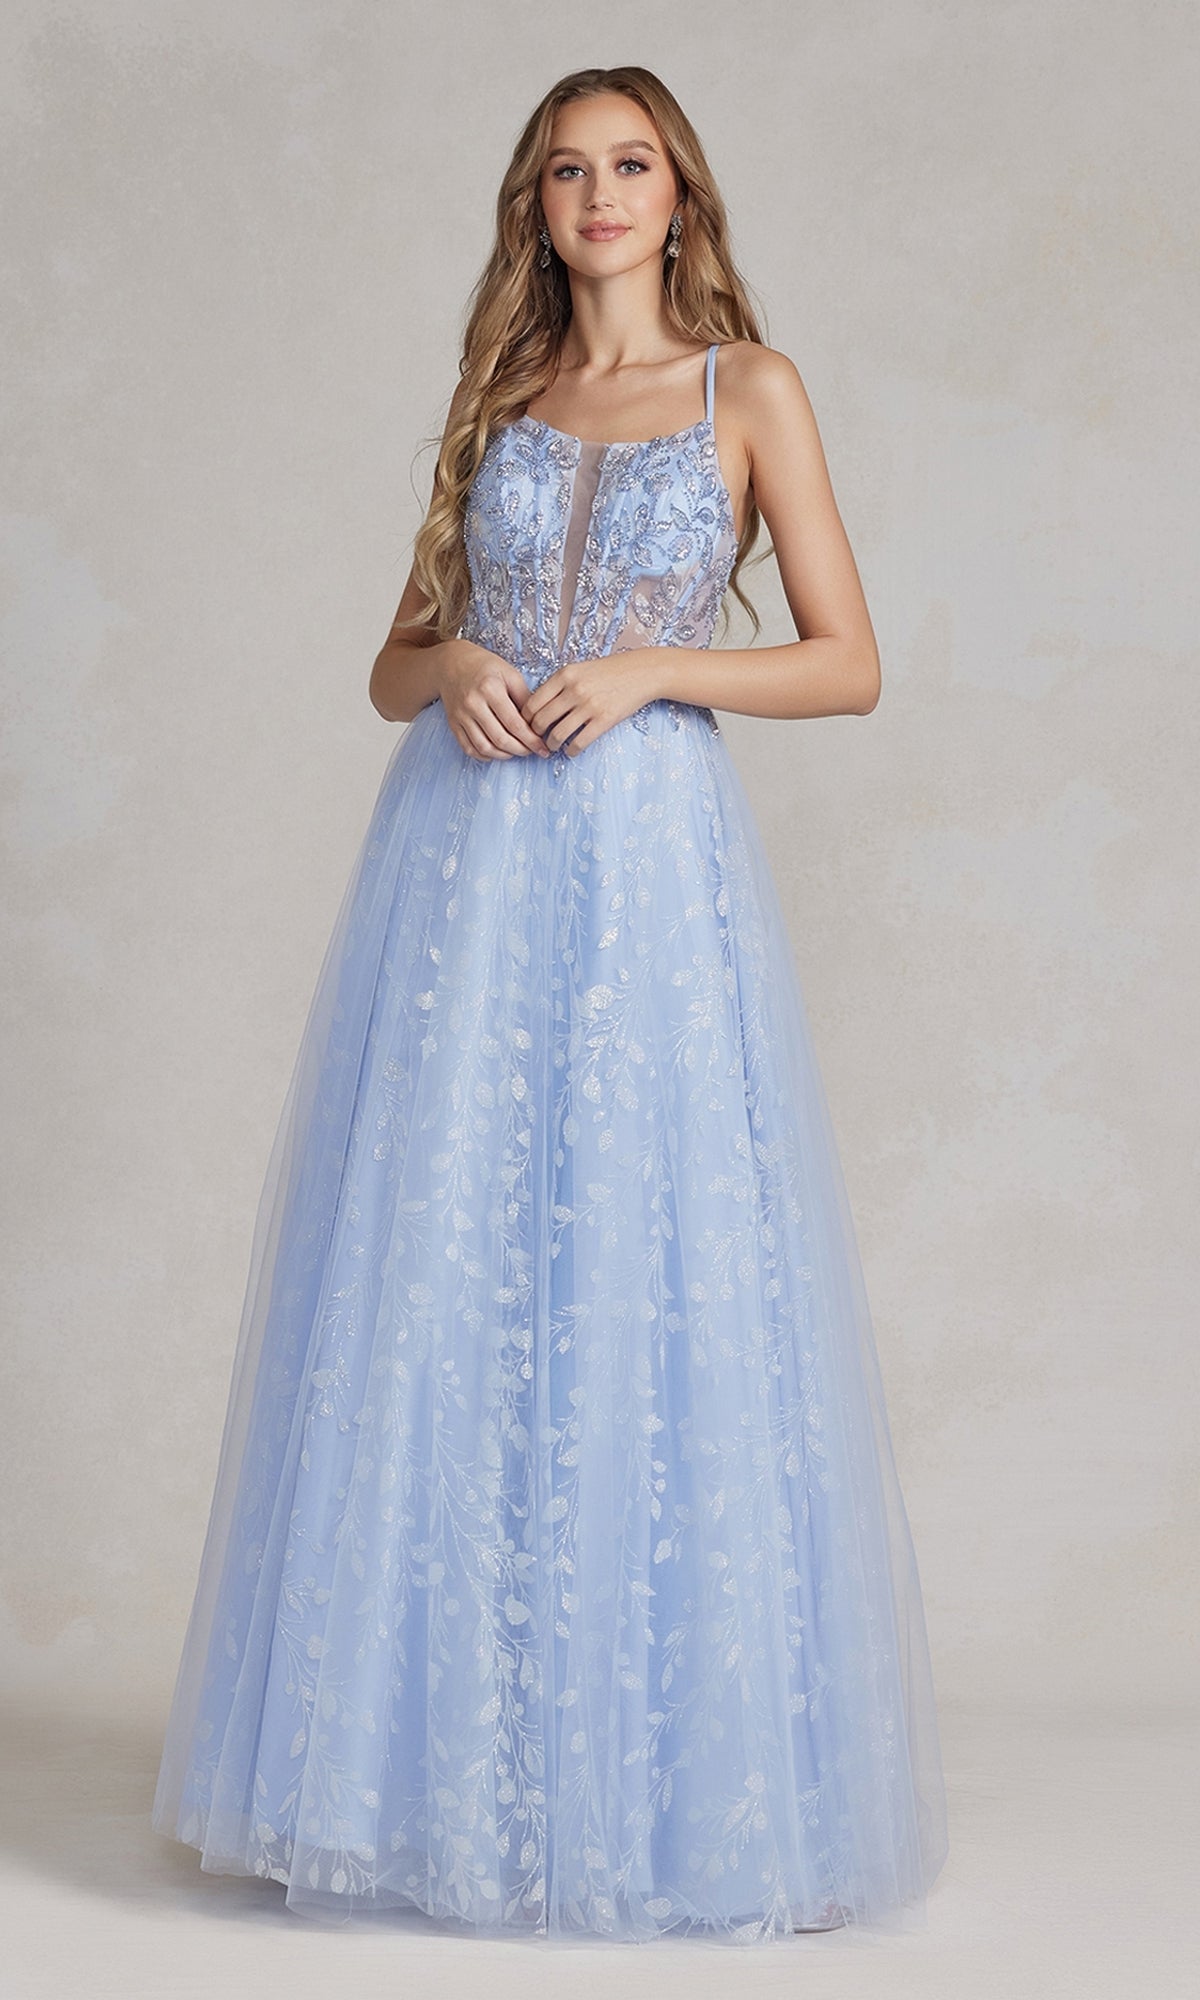 Periwinkle Periwinkle Sheer-Bodice Long A-Line Prom Dress